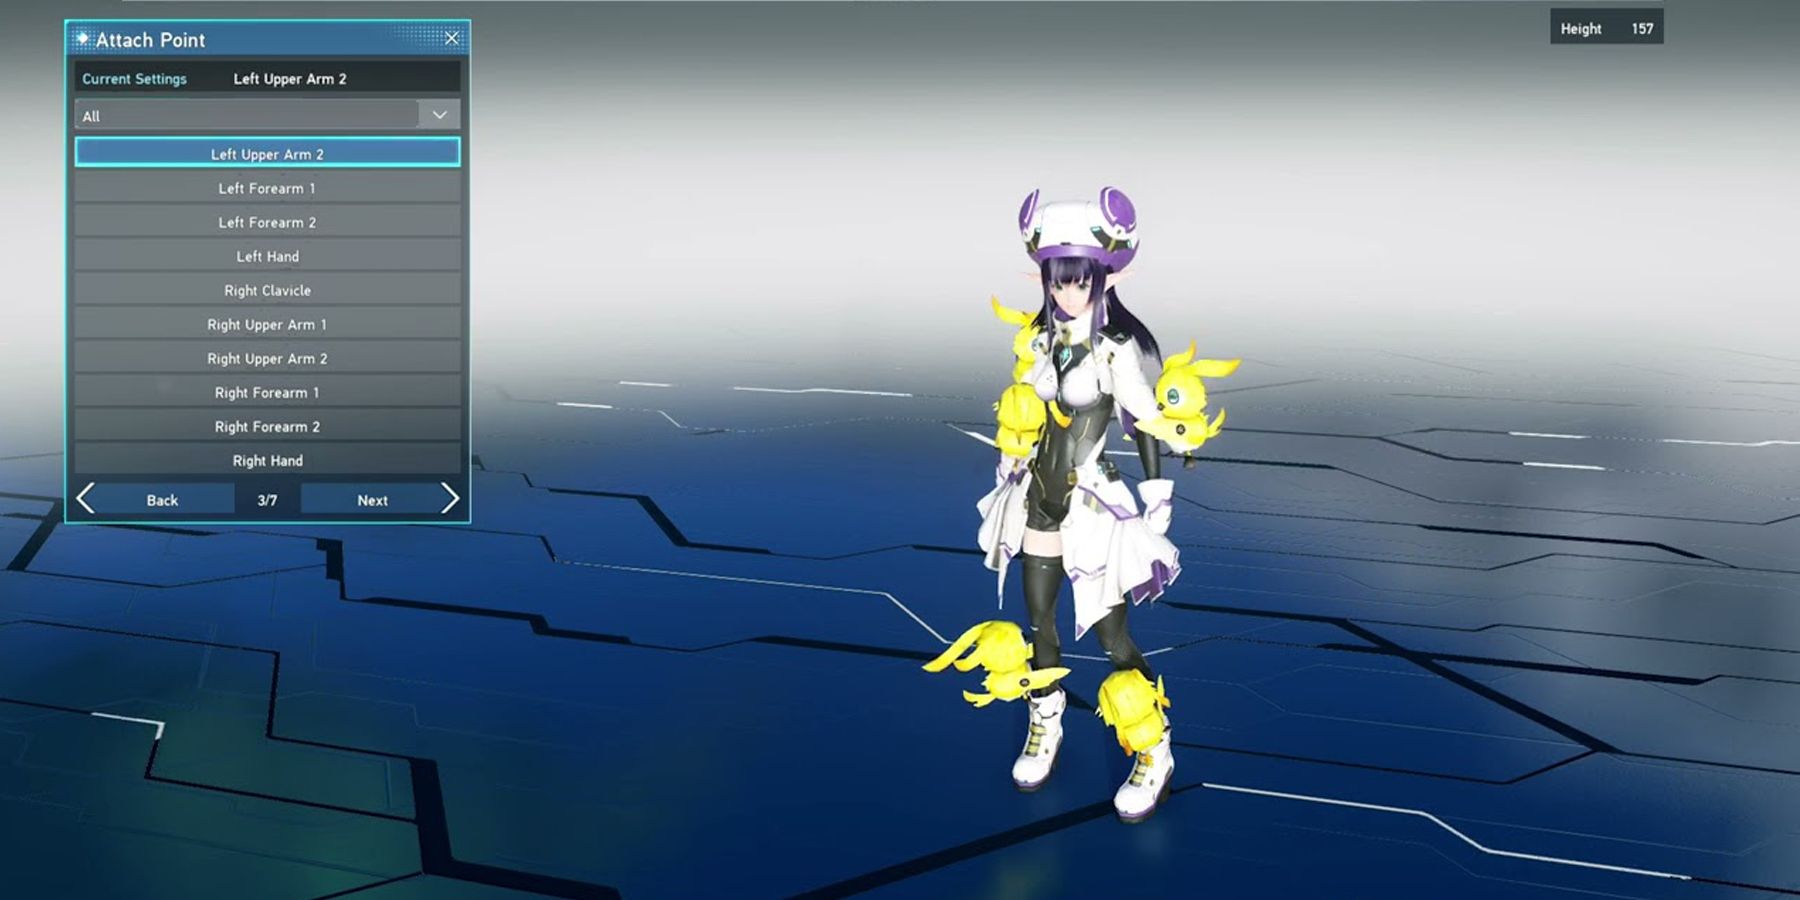 Accessories in PSO2NG